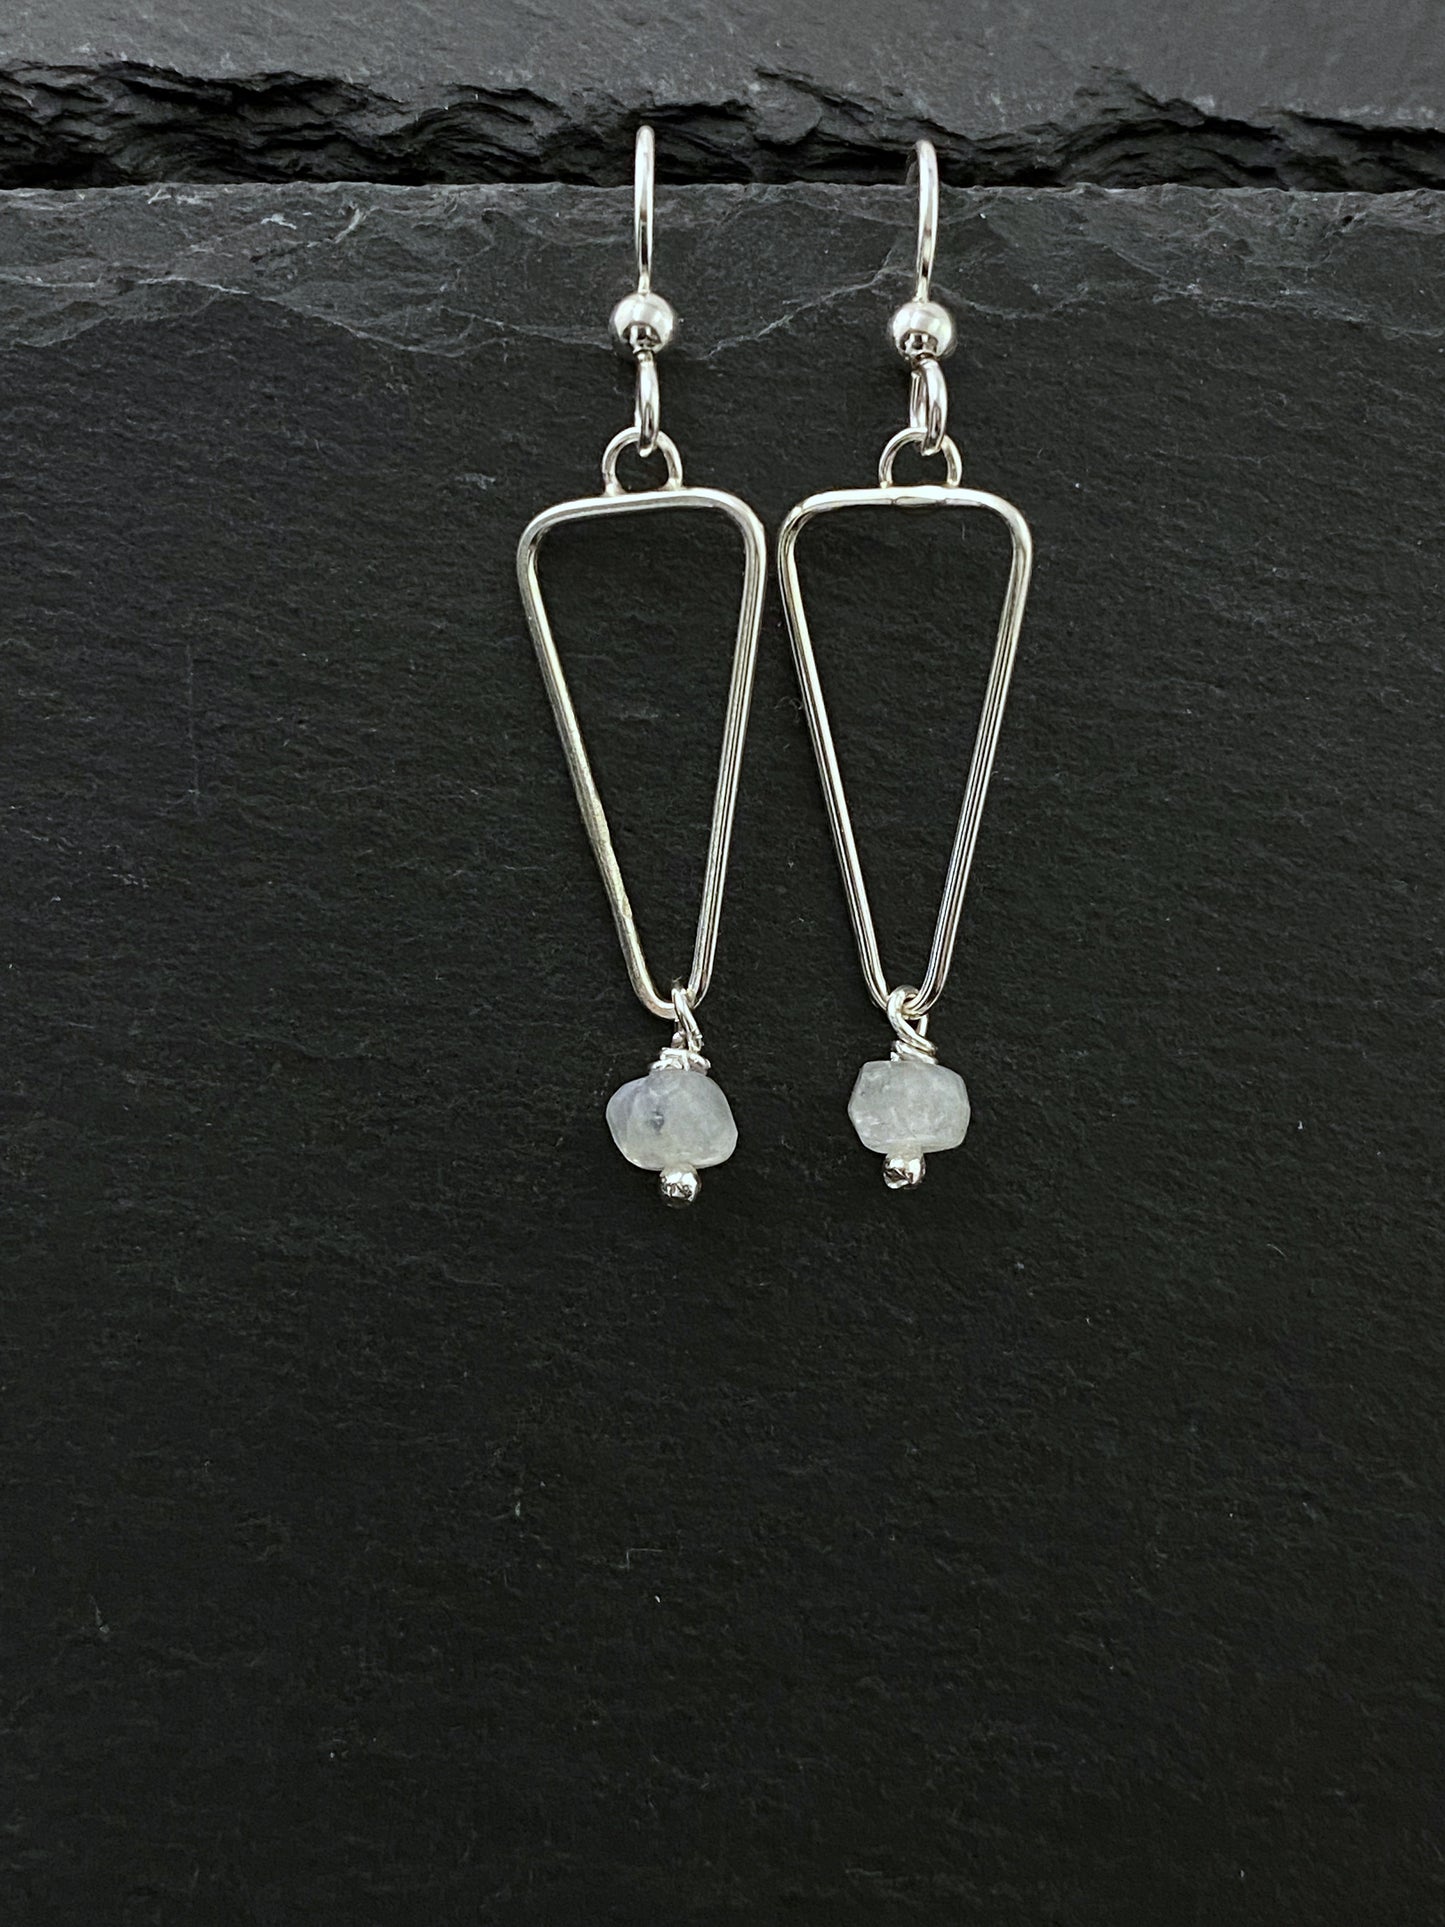 Sterling silver forged earrings with moonstone gemstones